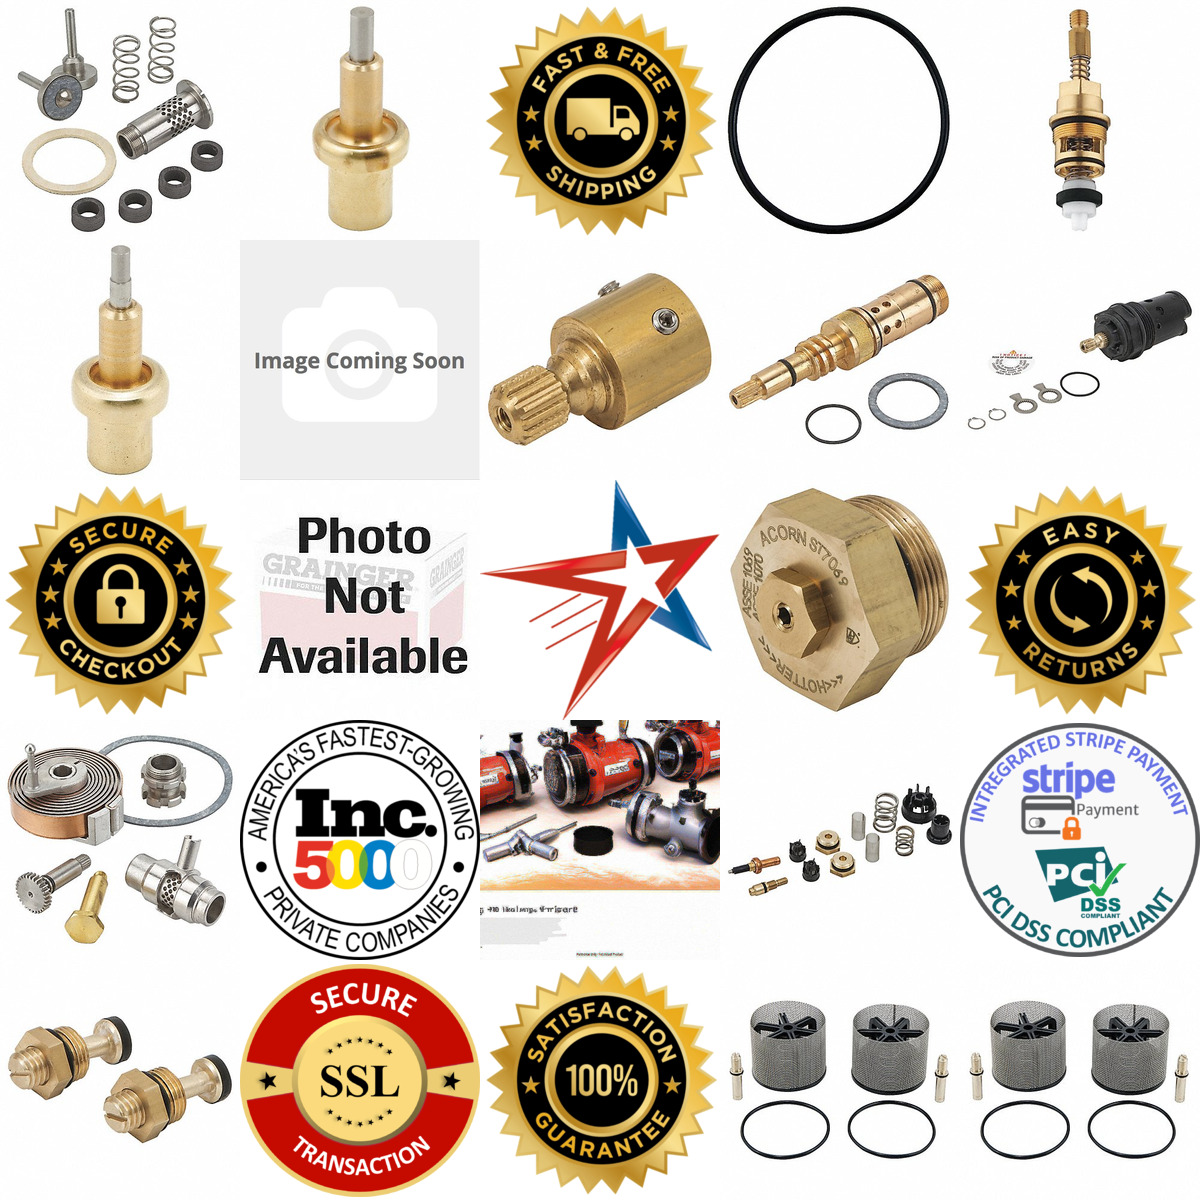 A selection of Mixing Valve Repair Kits products on GoVets